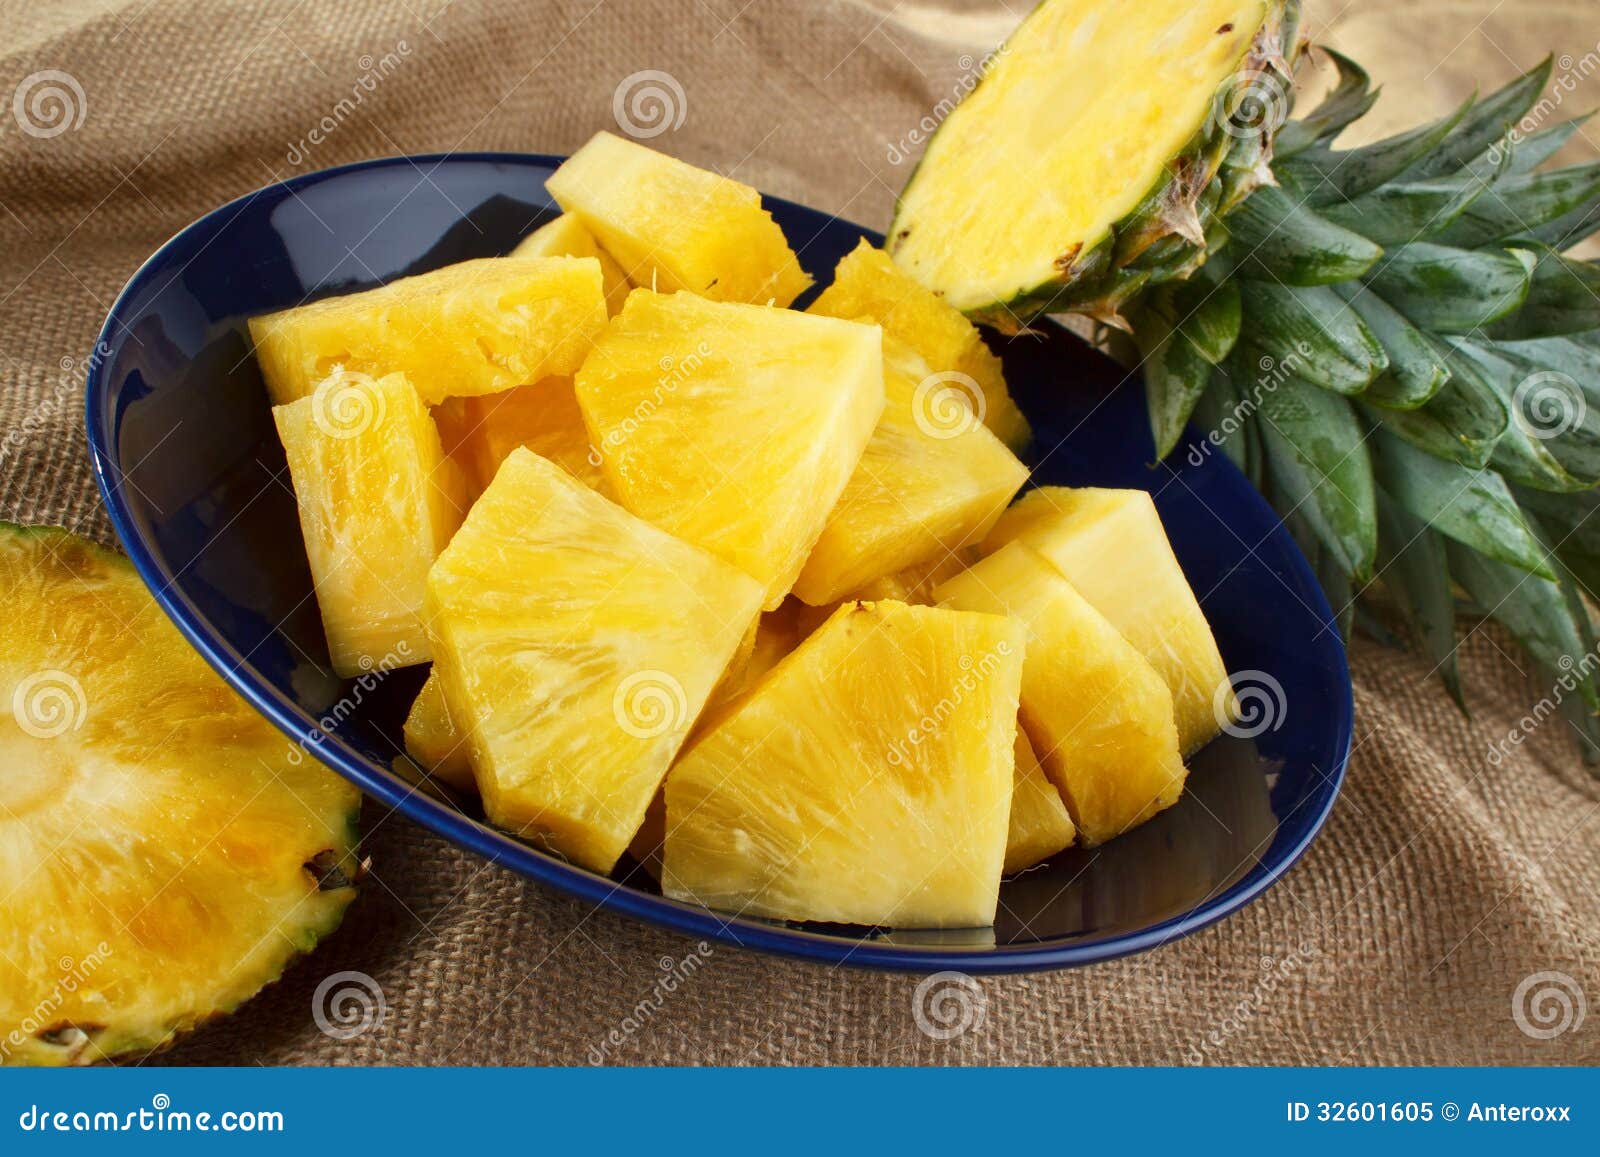 Sliced Pineapple In A Bowl On A Cutting Board With A Knife And A Whole  Pineapple Stock Photo - Download Image Now - iStock